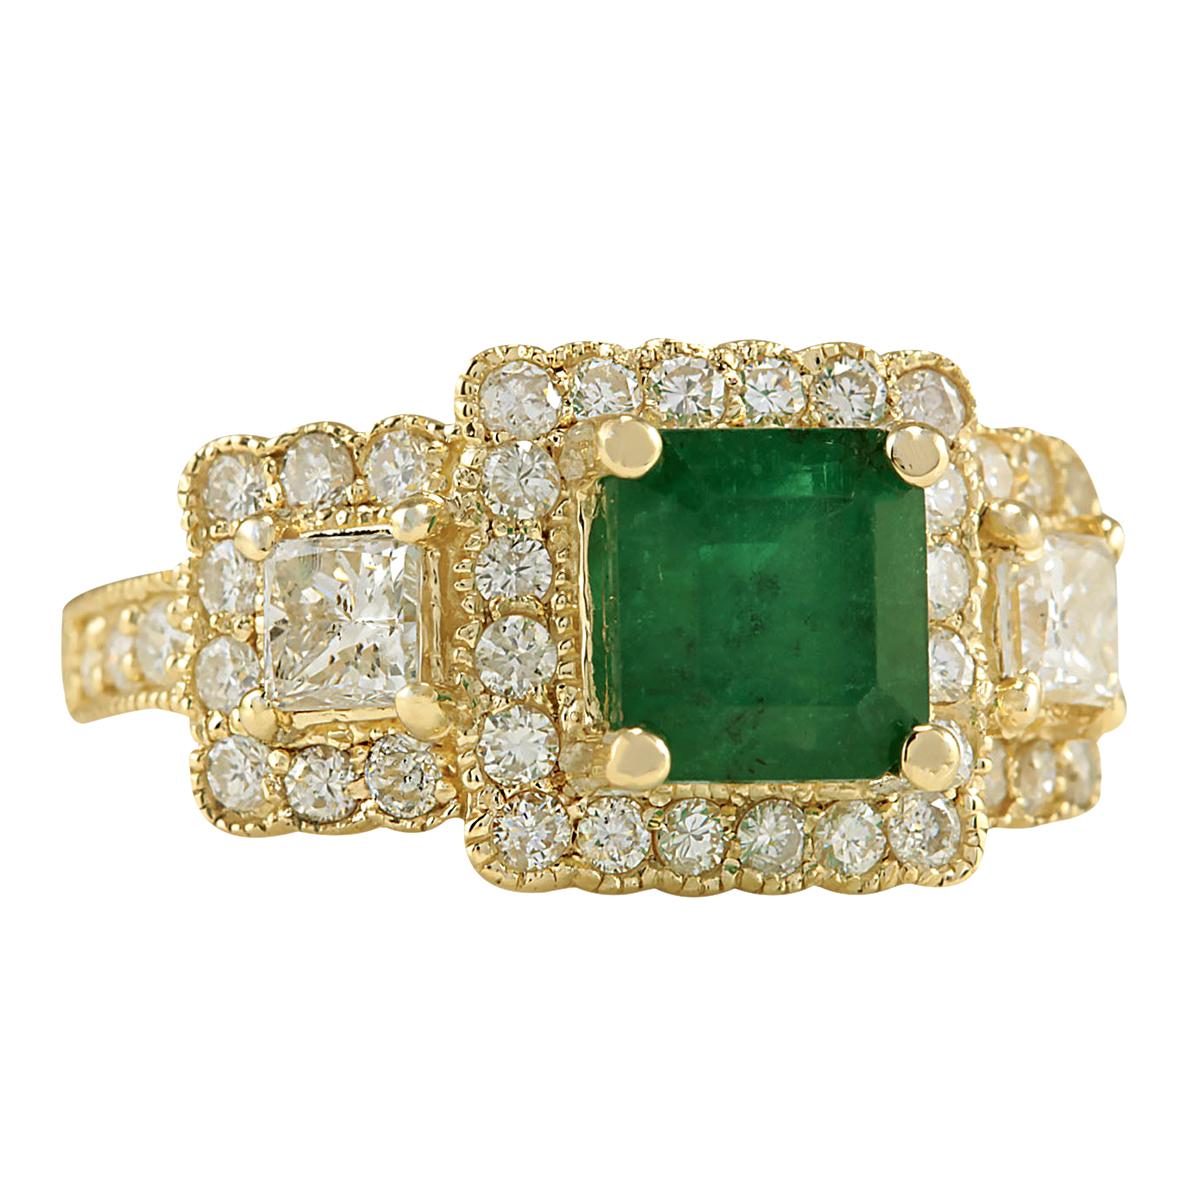 Stamped: 14K Yellow Gold
Total Ring Weight: 7.5 Grams
Total Natural Emerald Weight is 2.43 Carat (Measures: 7.00x7.00 mm)
Color: Green
Total Natural Diamond Weight is 1.50 Carat
Color: F-G, Clarity: VS2-SI1
Face Measures: 11.50x20.10 mm
Sku: